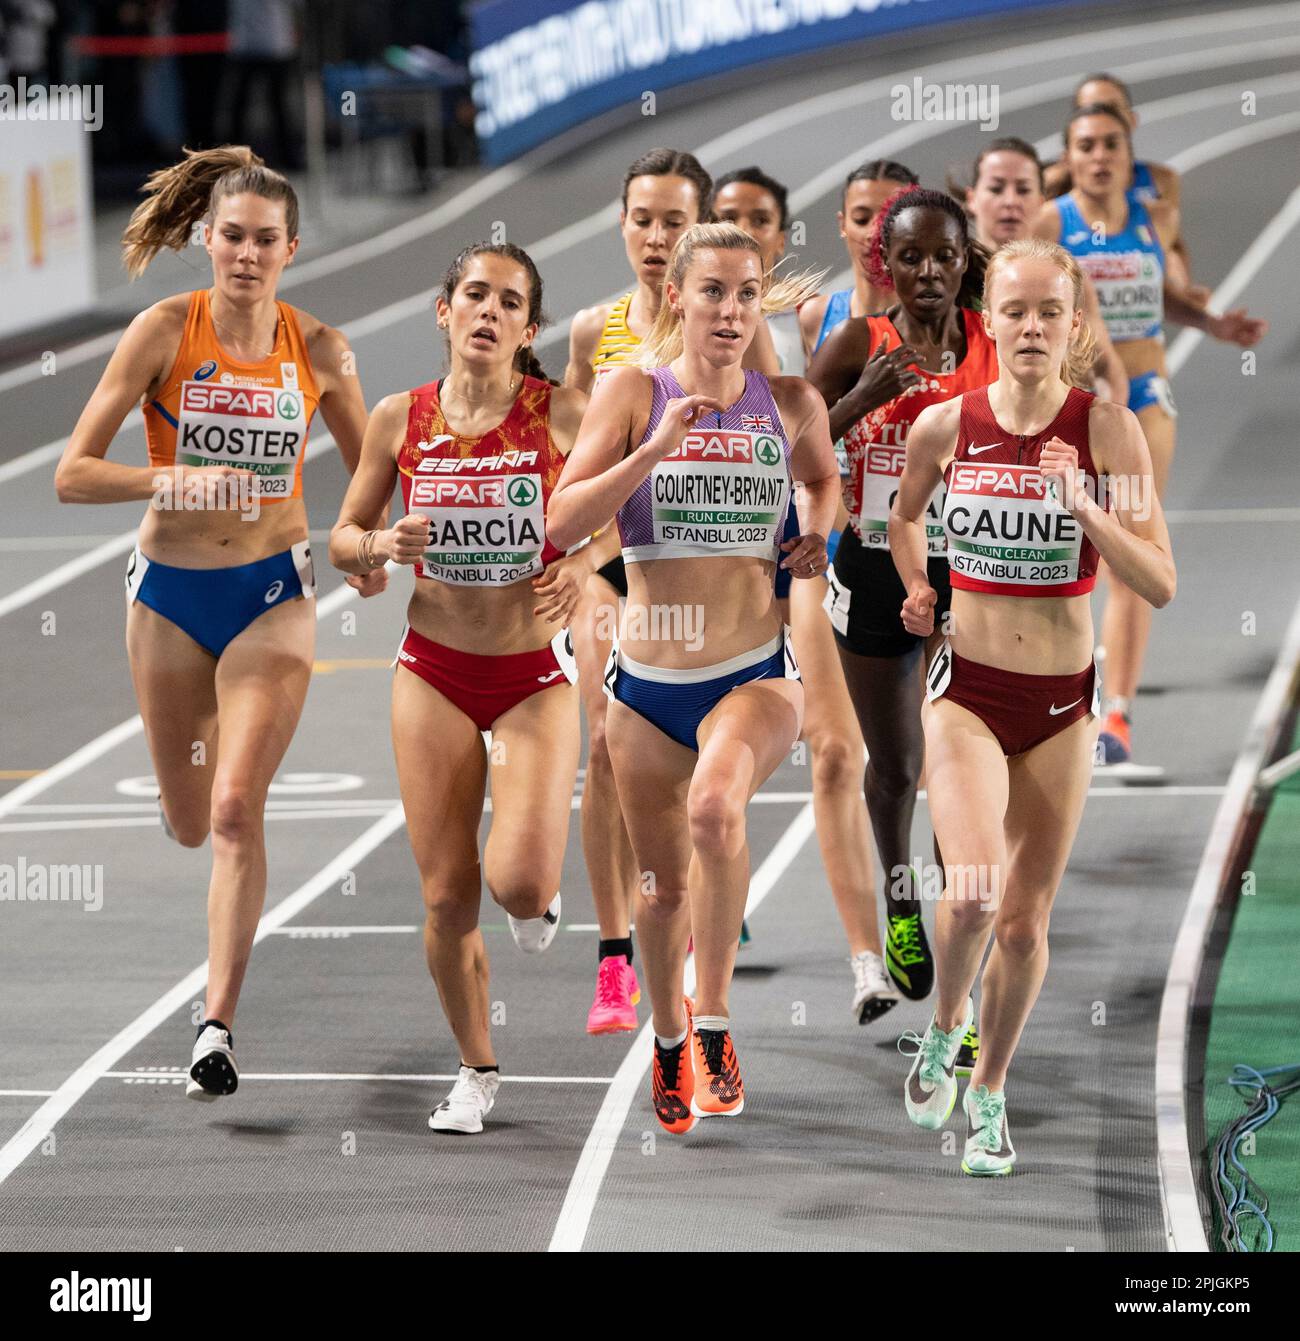 Agate Caune of Latvia competing in the women’s 3000m heats at the European Indoor Athletics Championships at Ataköy Athletics Arena in Istanbul, Türki Stock Photo